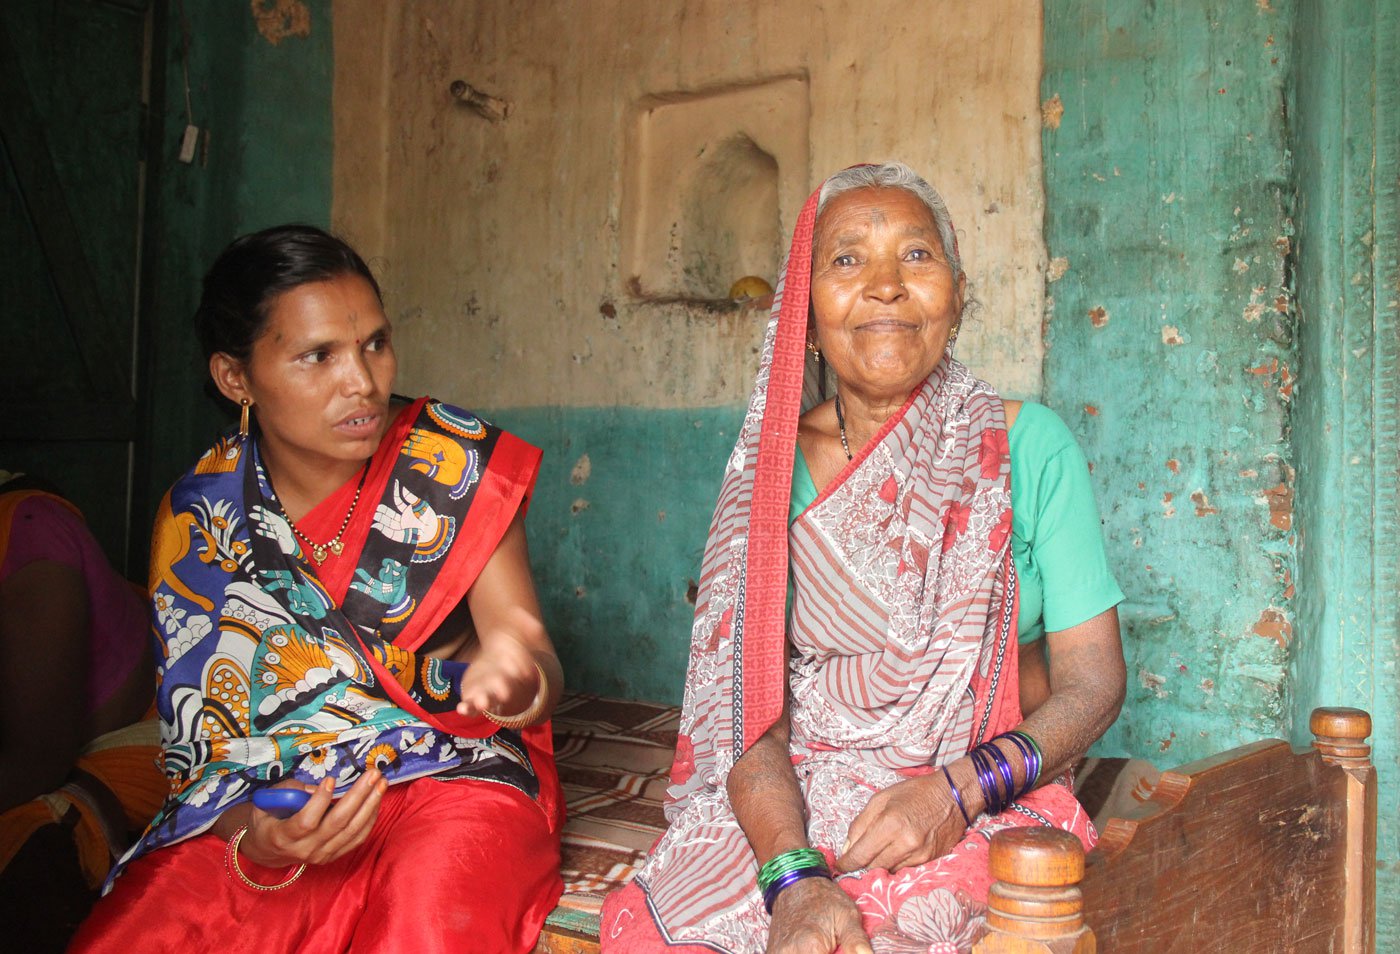 Bortyakheda’s ANM Shanta Durve (left) urges Charku, the village's elderly dai, to come along even for deliveries the PHC